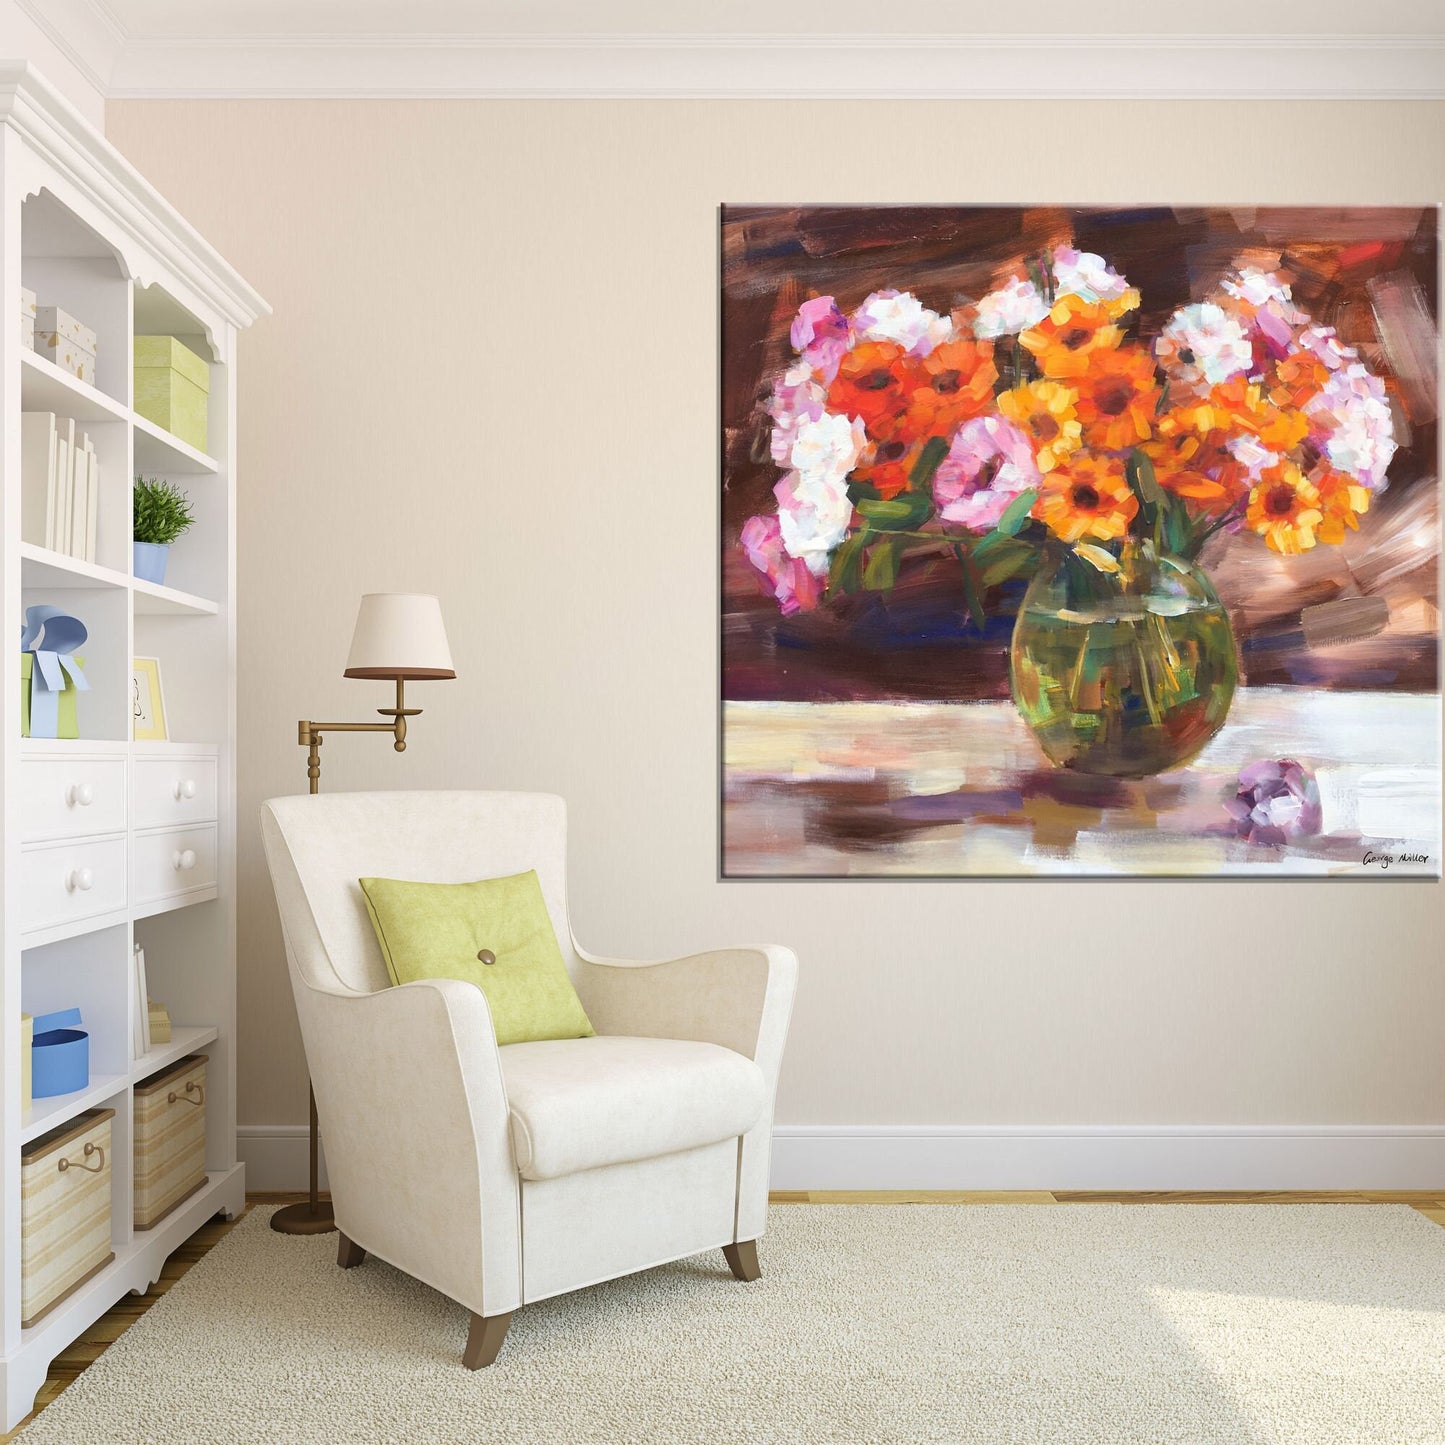 Flower Painting, Oil Painting, Canvas Art, Oil Painting Flower, Palette Knife Painting, Wall Art, Garden Painting, Large Abstract Painting